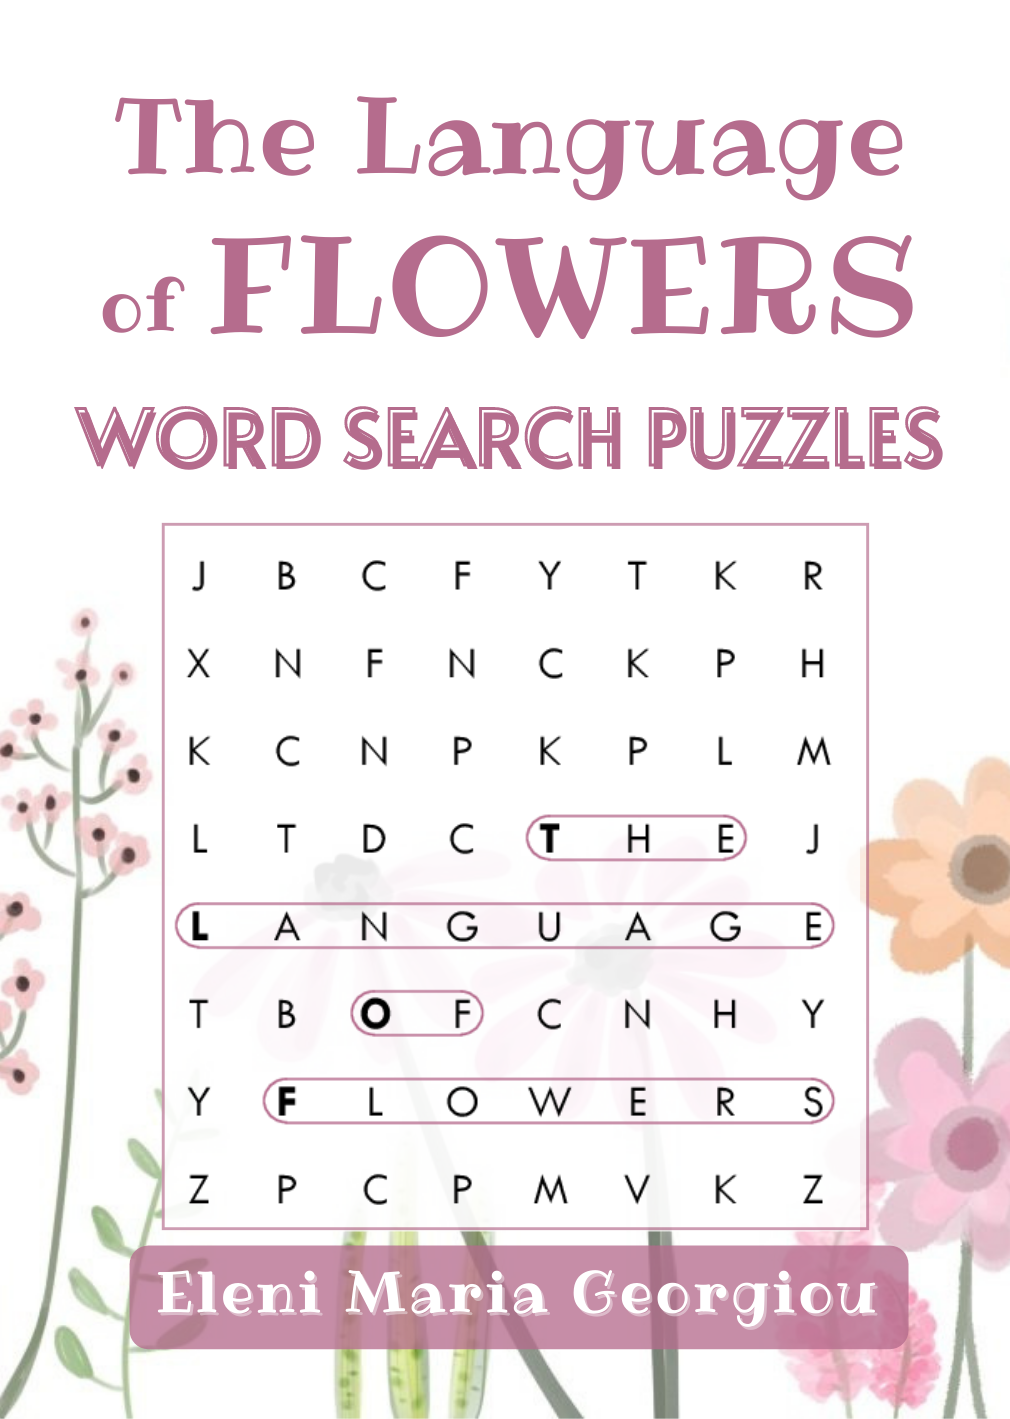 The Language of Flowers Word Search Puzzles